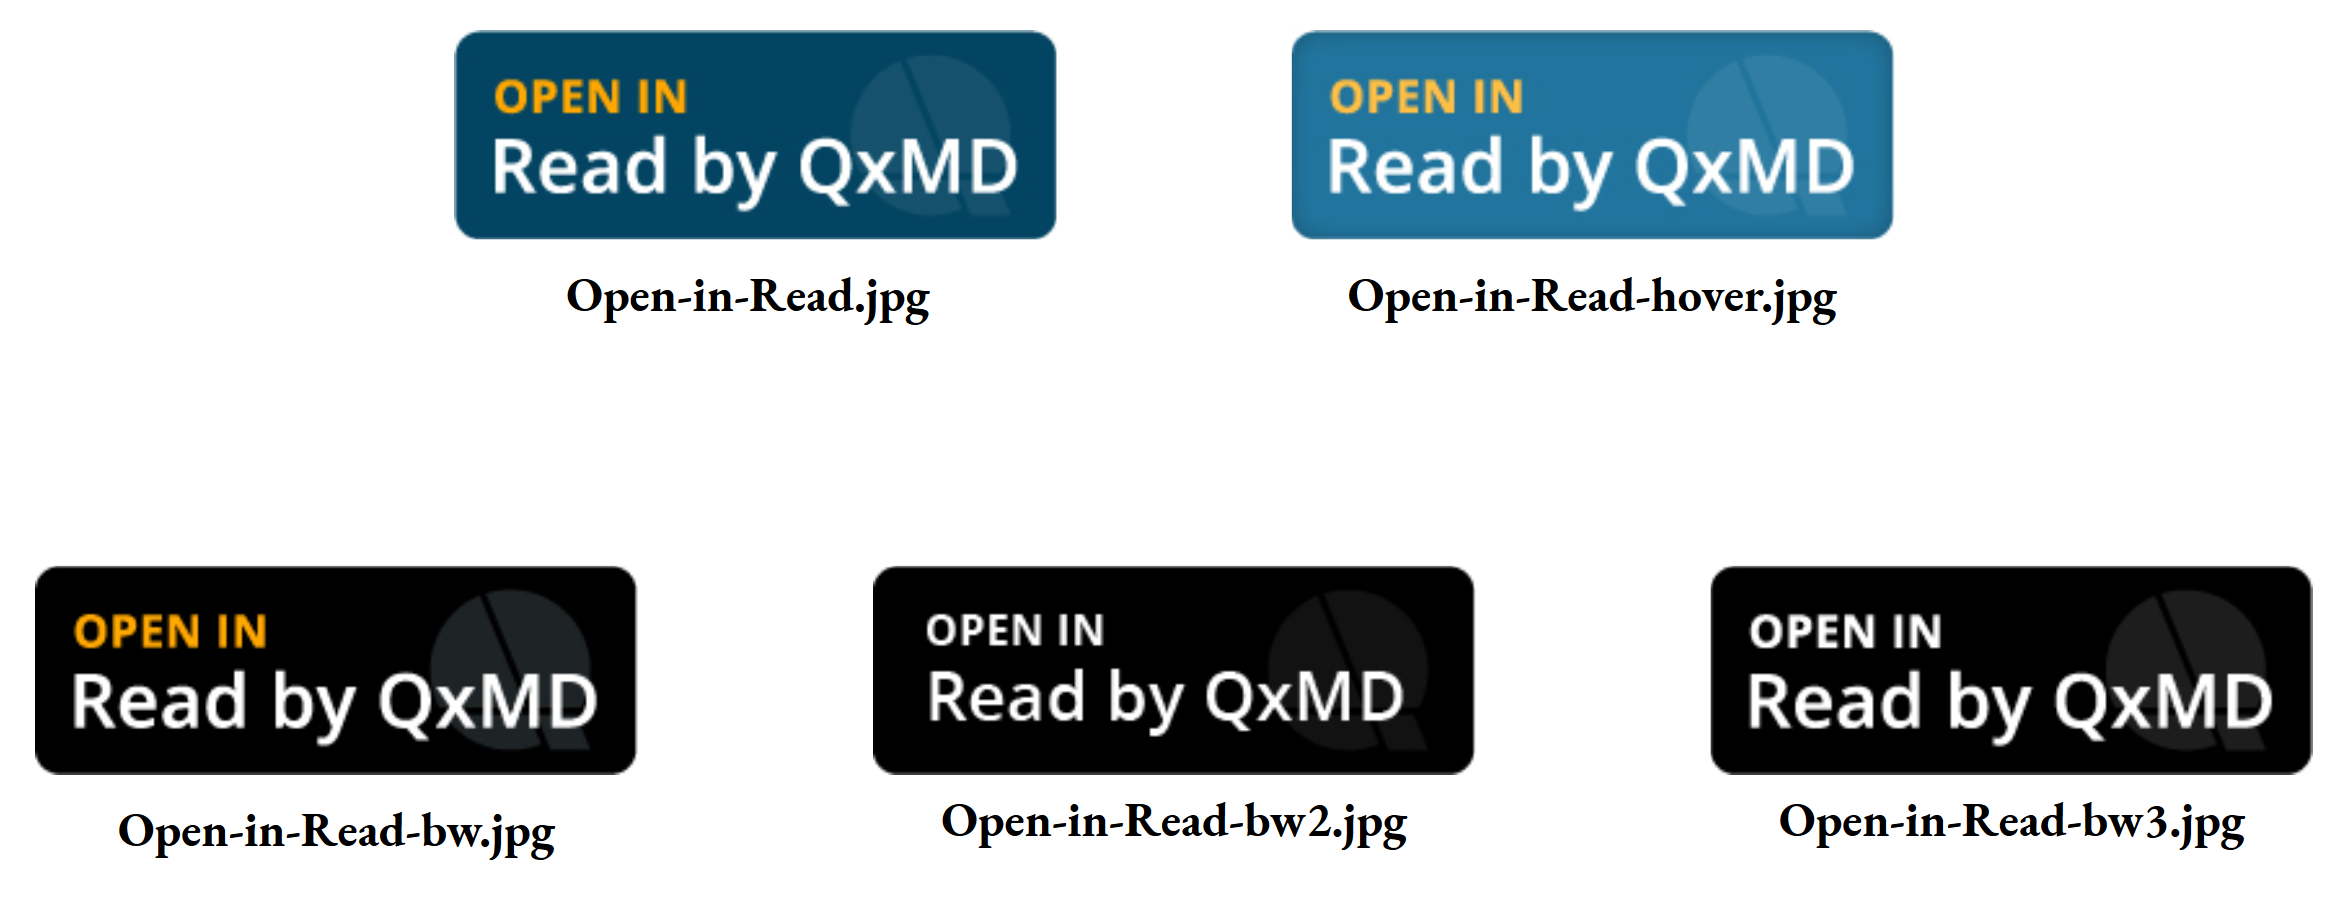 Open-in-Read_Button_Designs.PNG